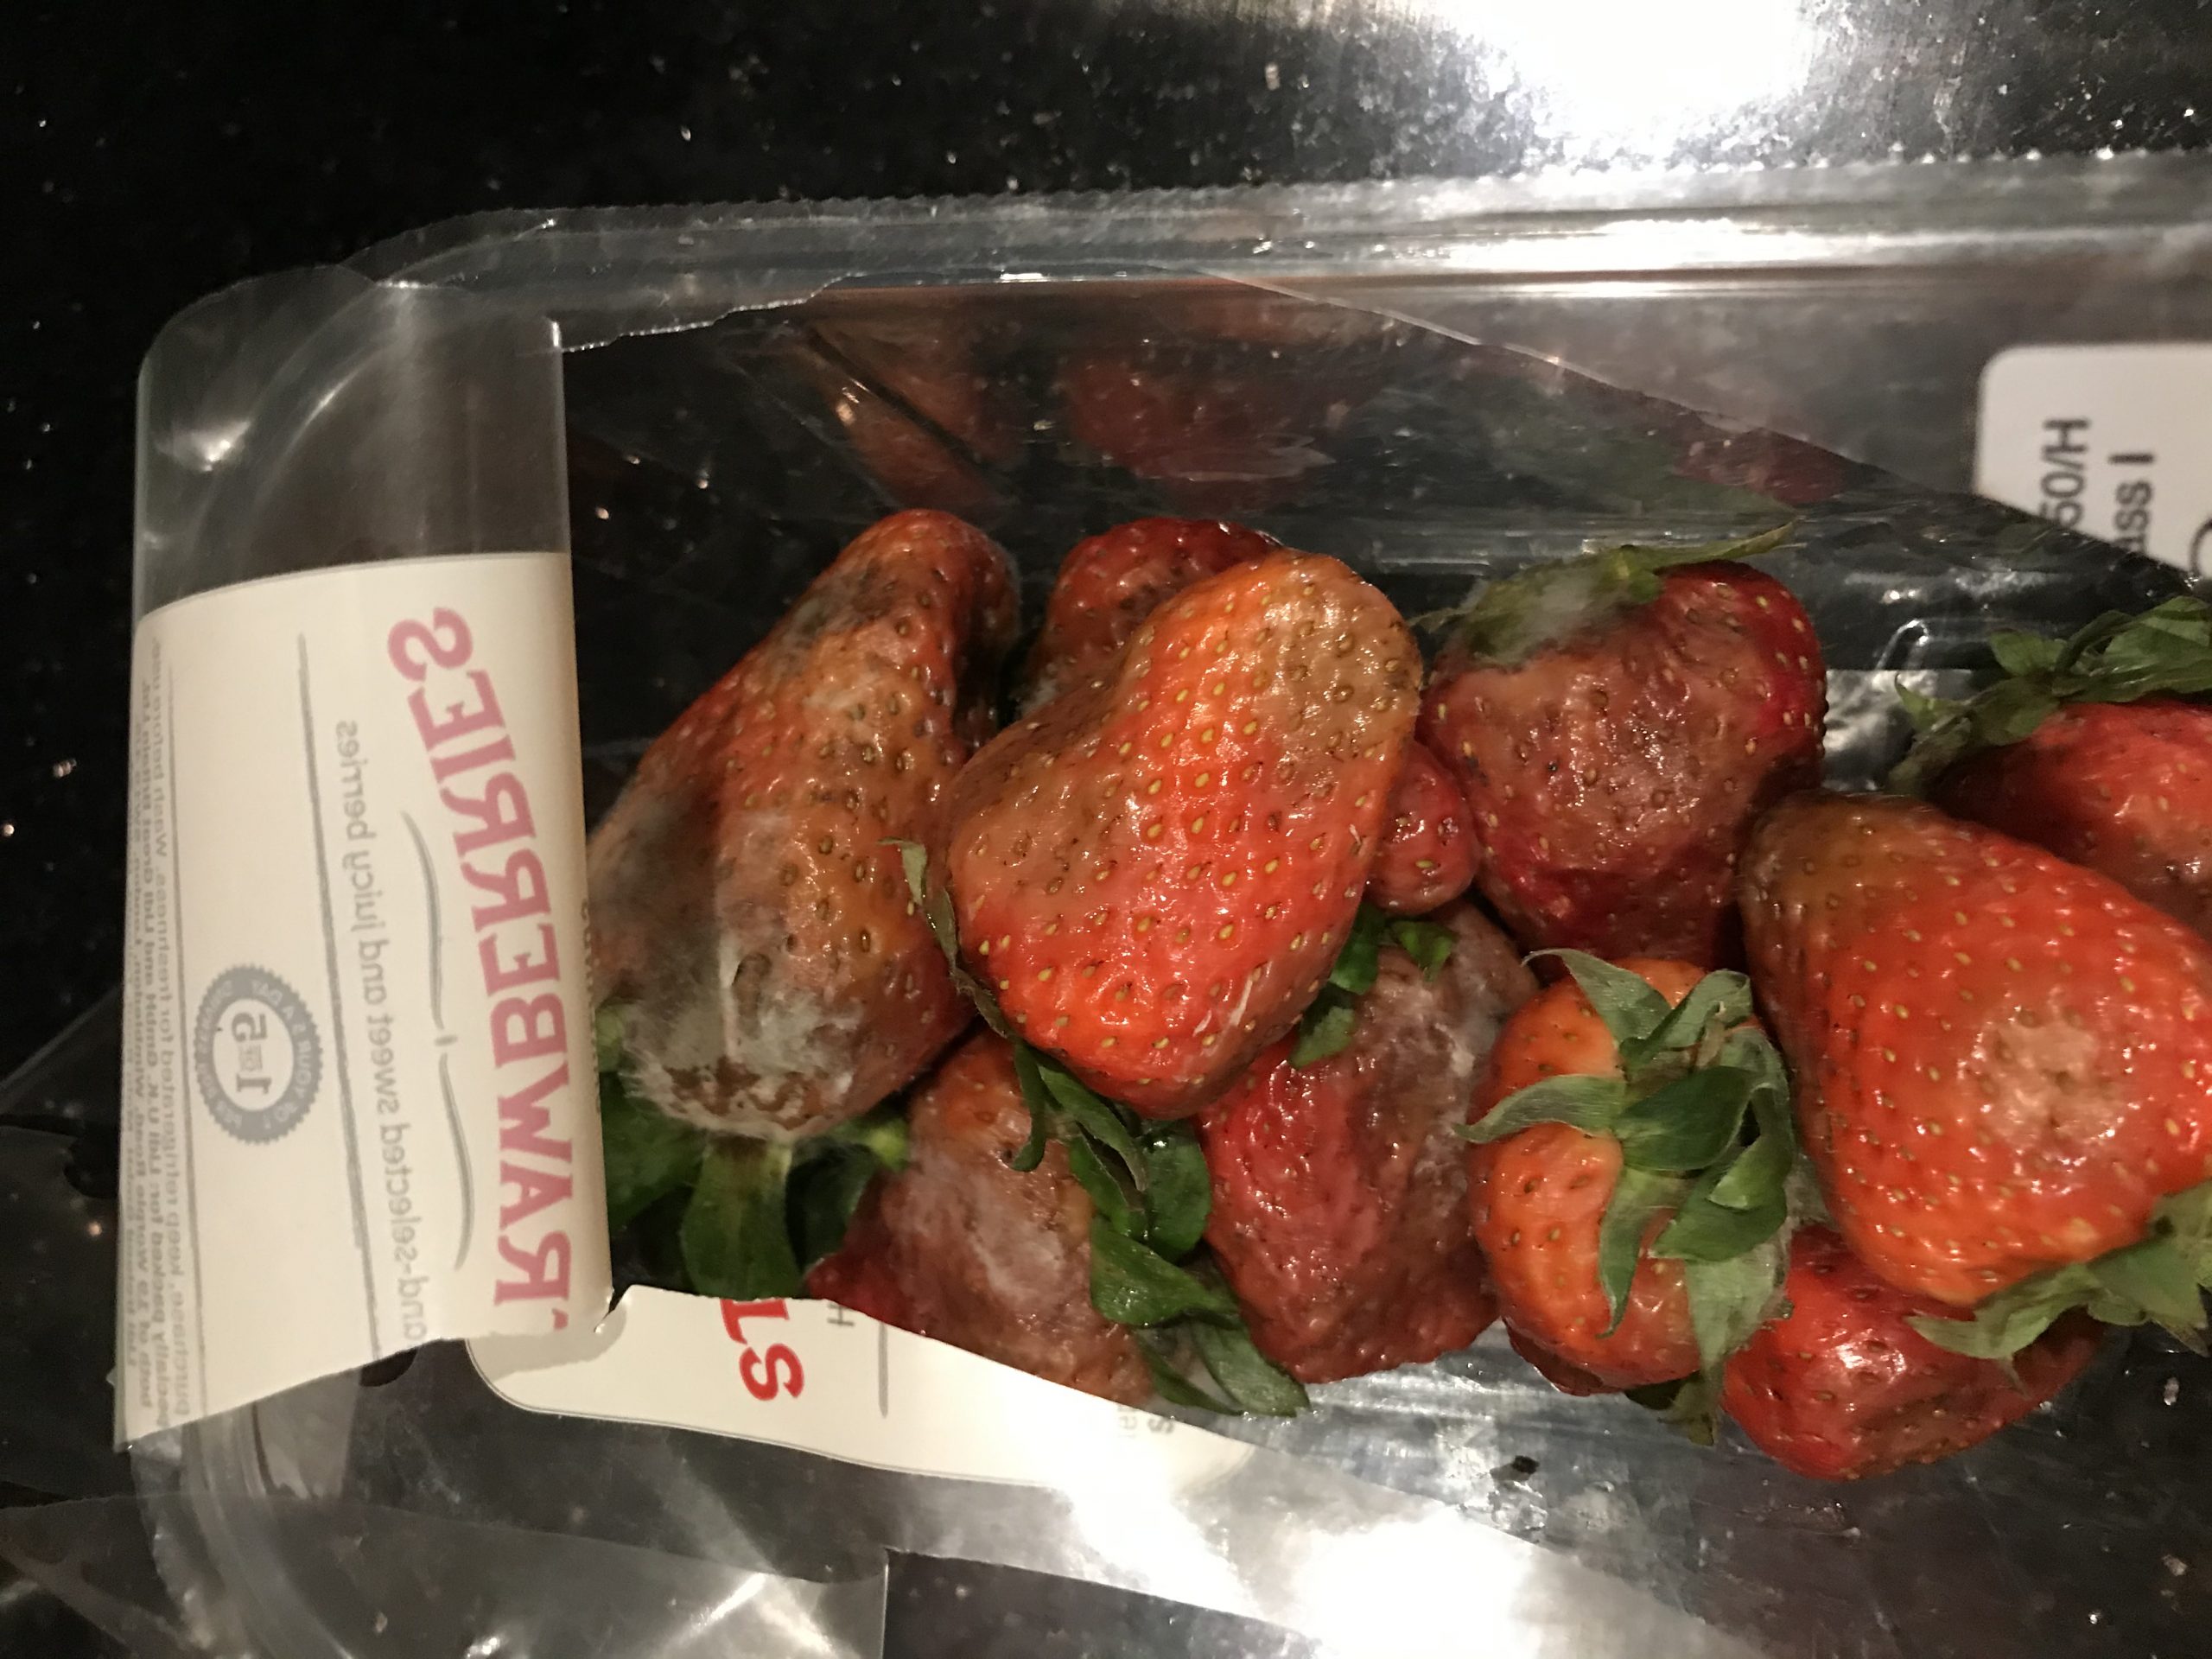 Lidl complaint Strawberries that went bad in less than 48 hours